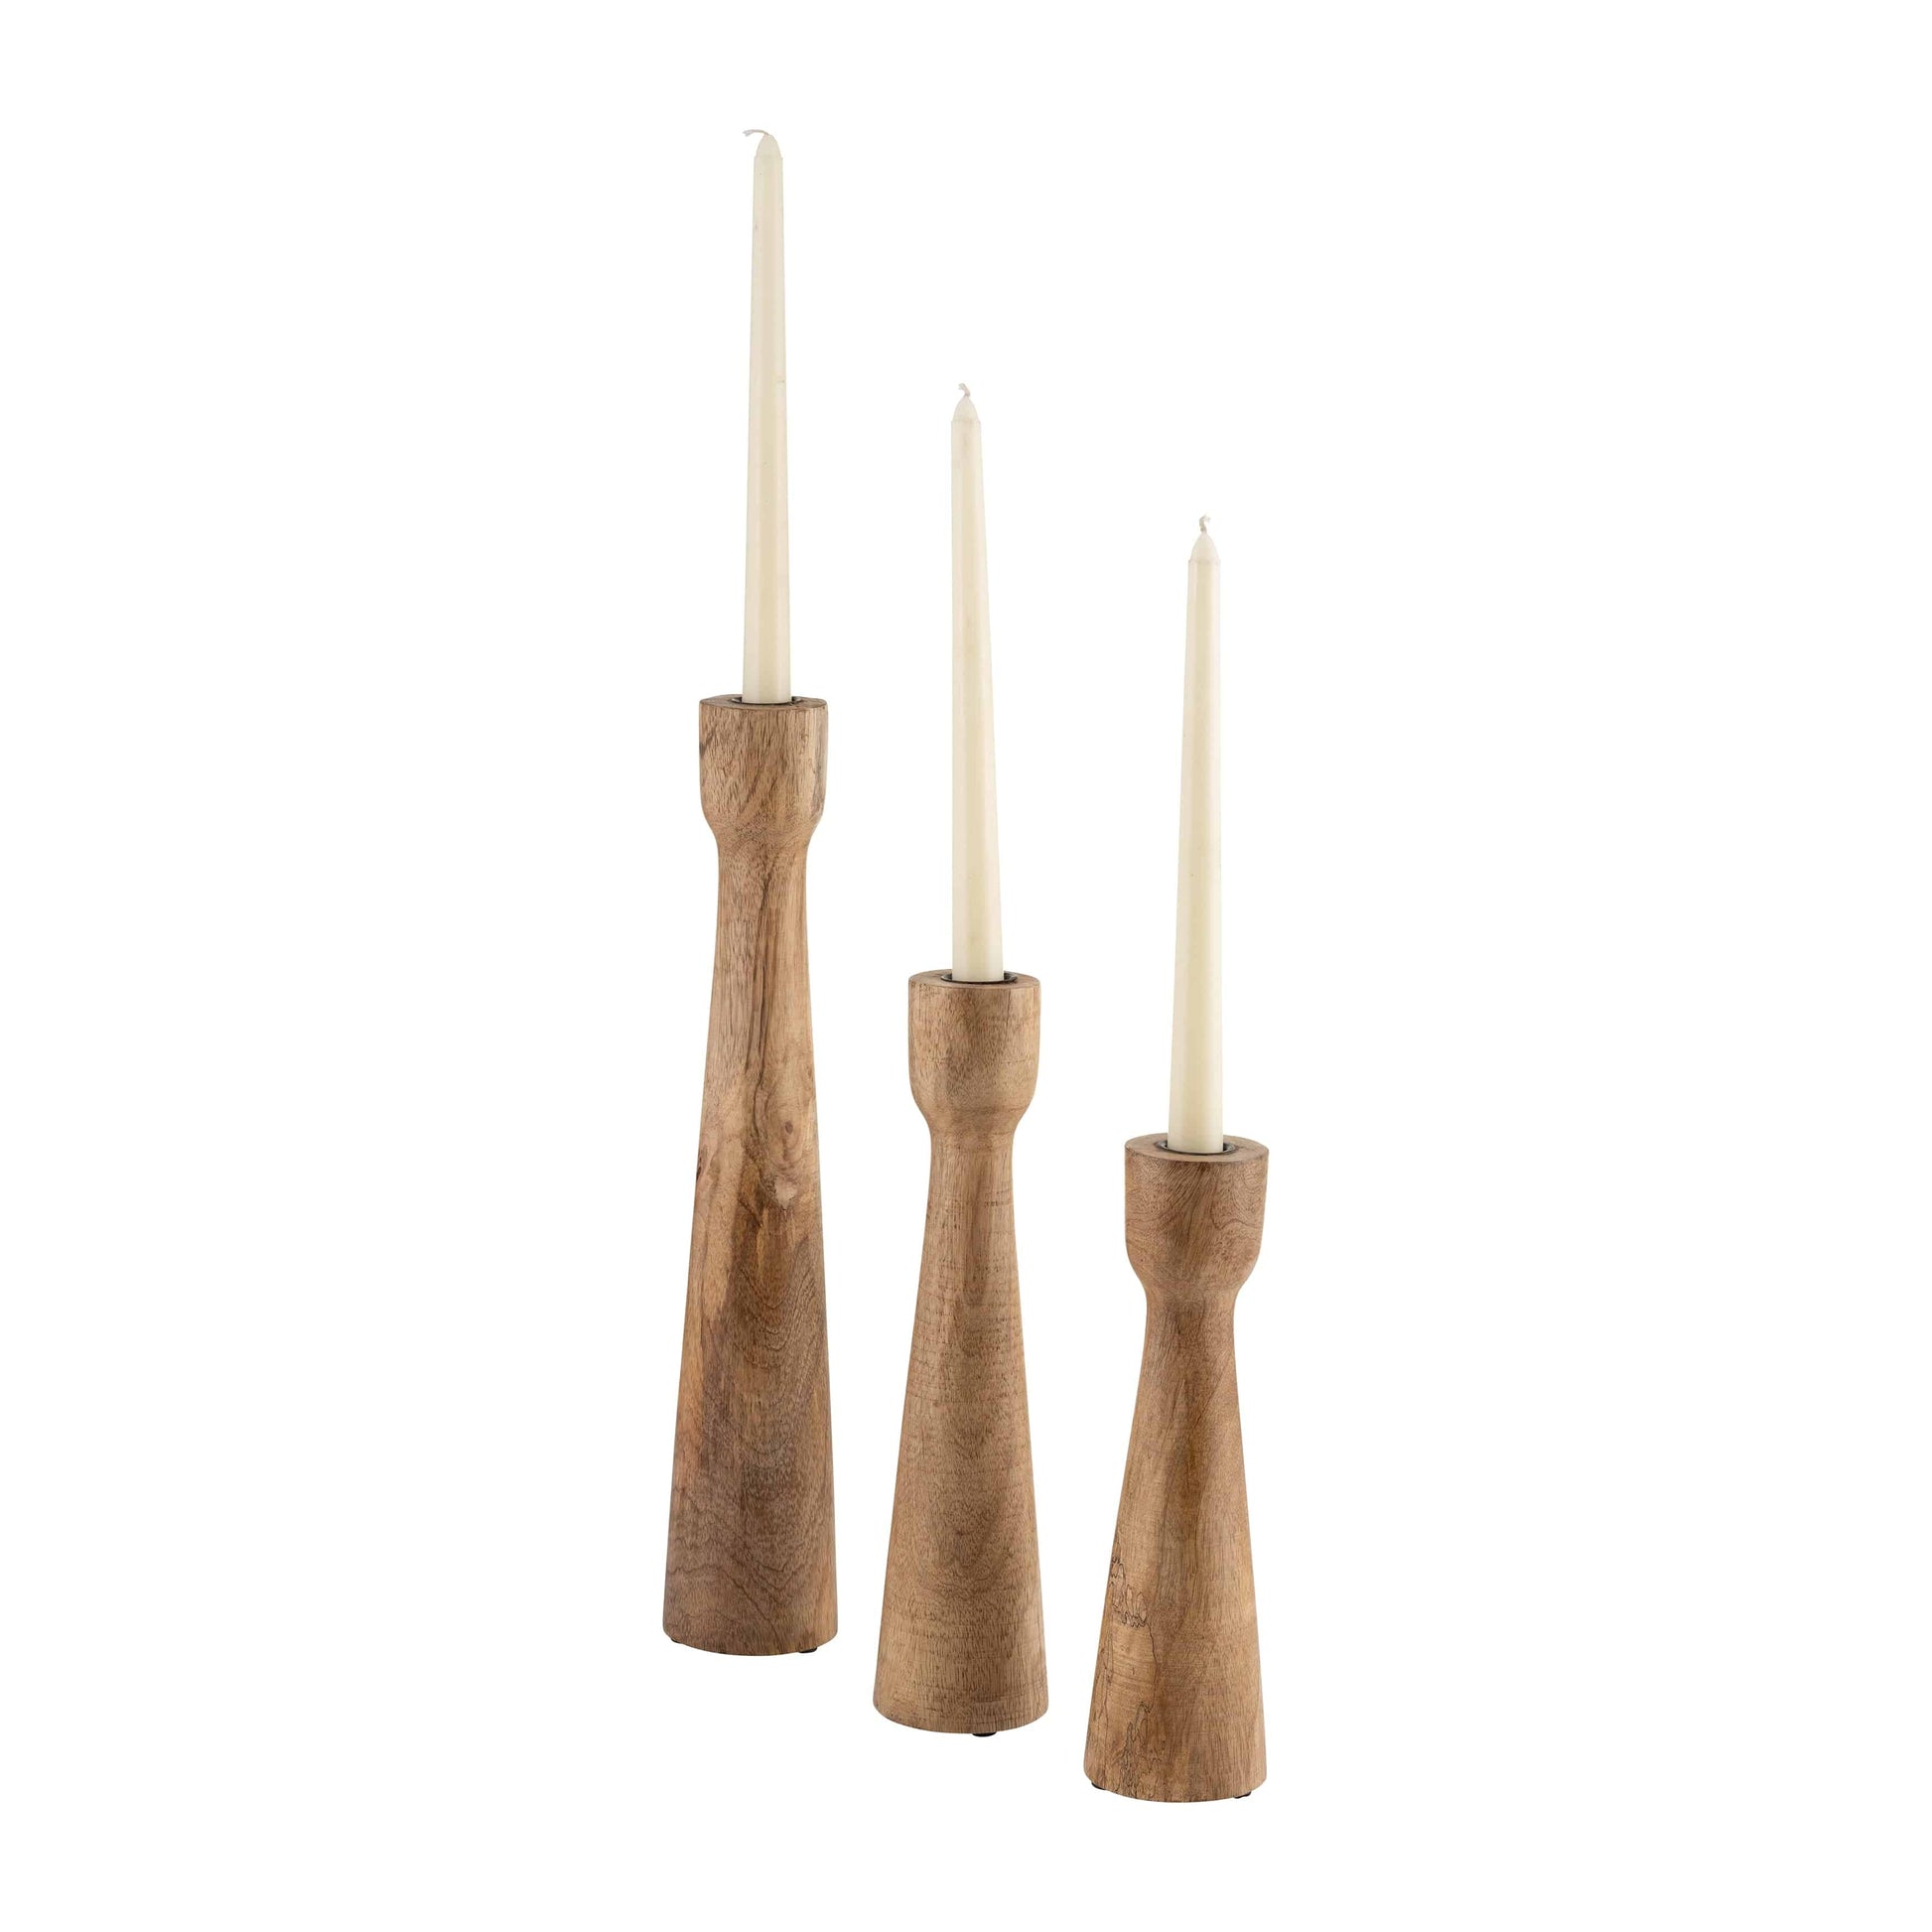 Wood Candle Holder In Brown - Elite Maison